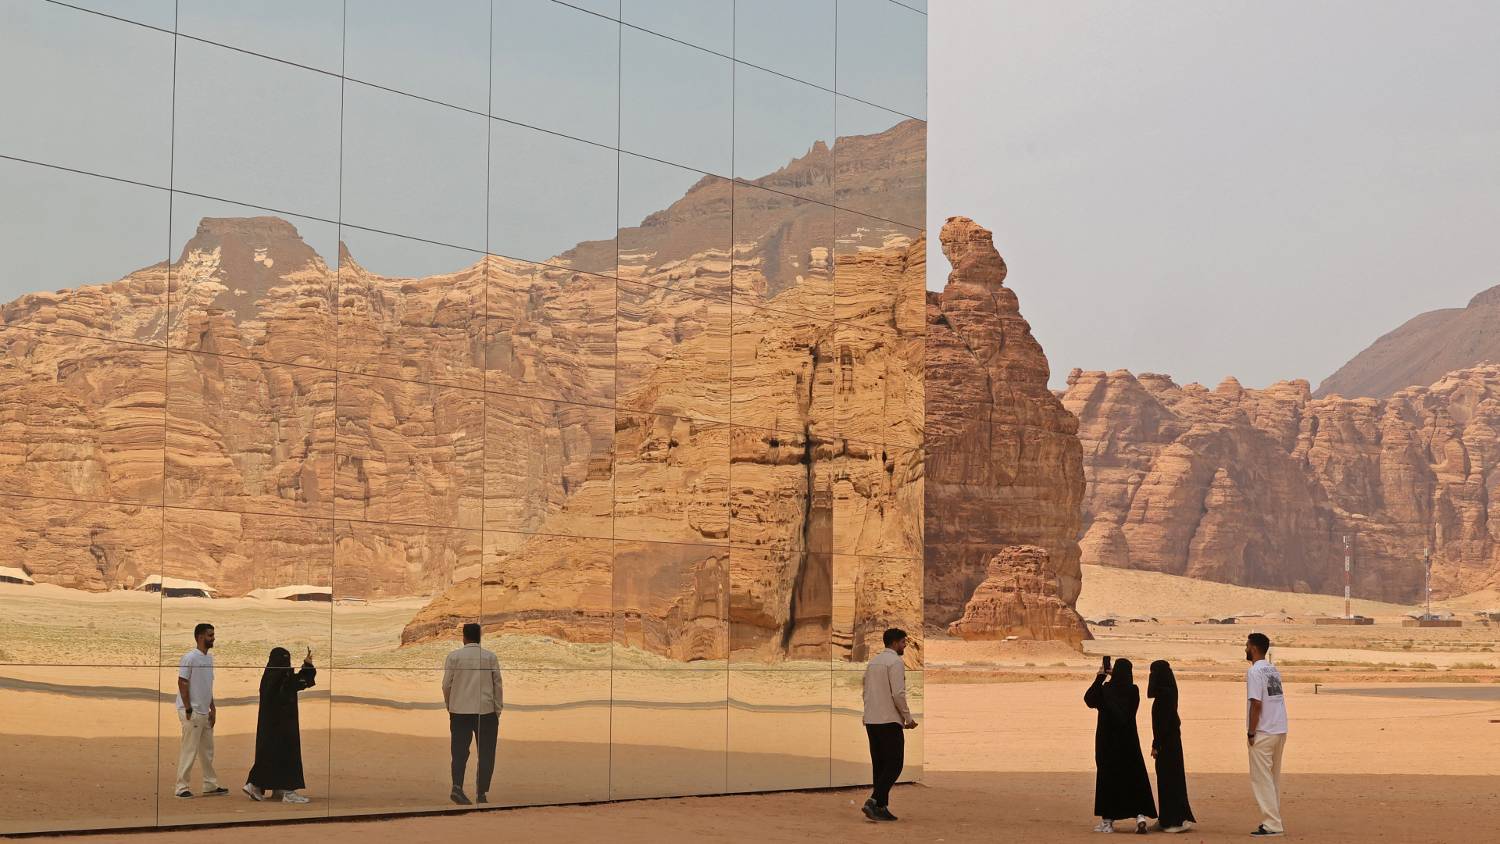 The Maraya concert hall, is said to be the world's largest mirrored building, and sits in the ruins of Al-Ula, a UNESCO World Heritage site in Saudi Arabia (Fayez Nureldine/AFP) 